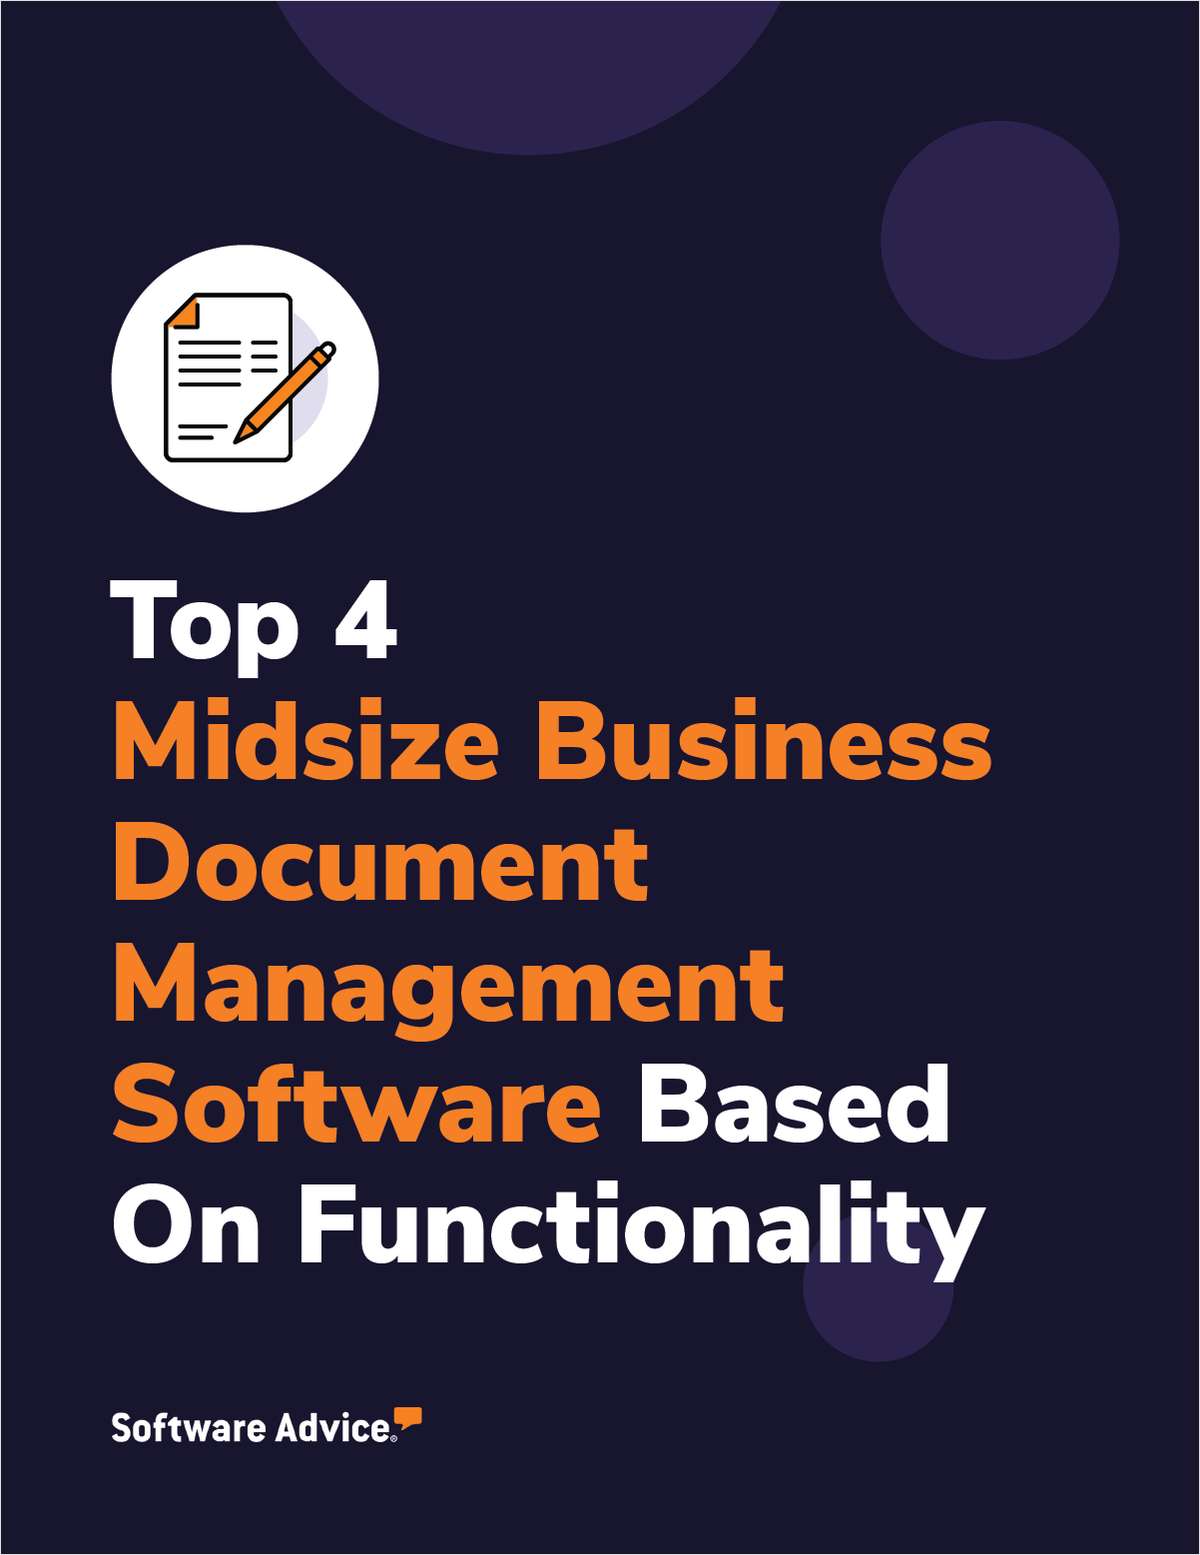 Top 4 Midsize Business Legal Document Management Software With the Best User Reviewed Functionality